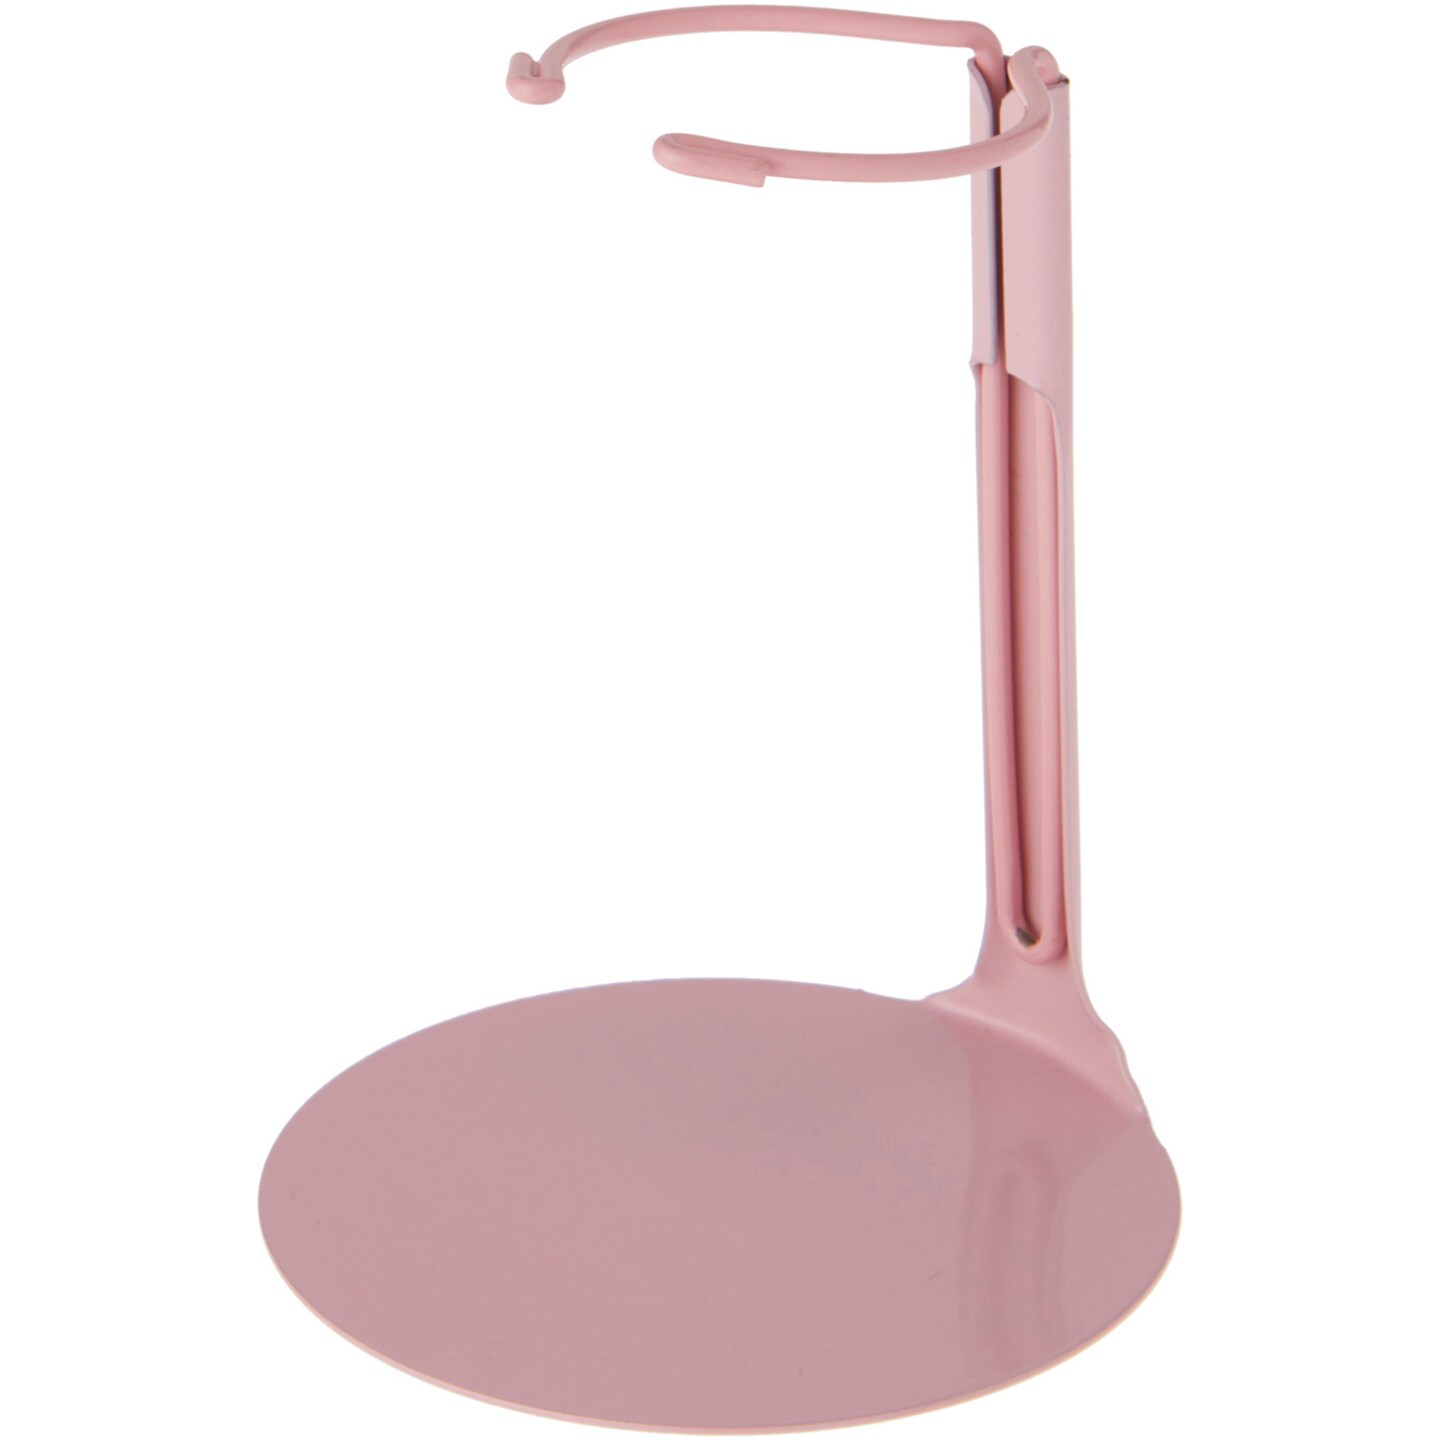 Kaiser 2095 Pink Adjustable Doll Stand, fits 6.5 to 11 inch Dolls or Action Figures, waist width adjusts from 1.375 to 1.75 inches